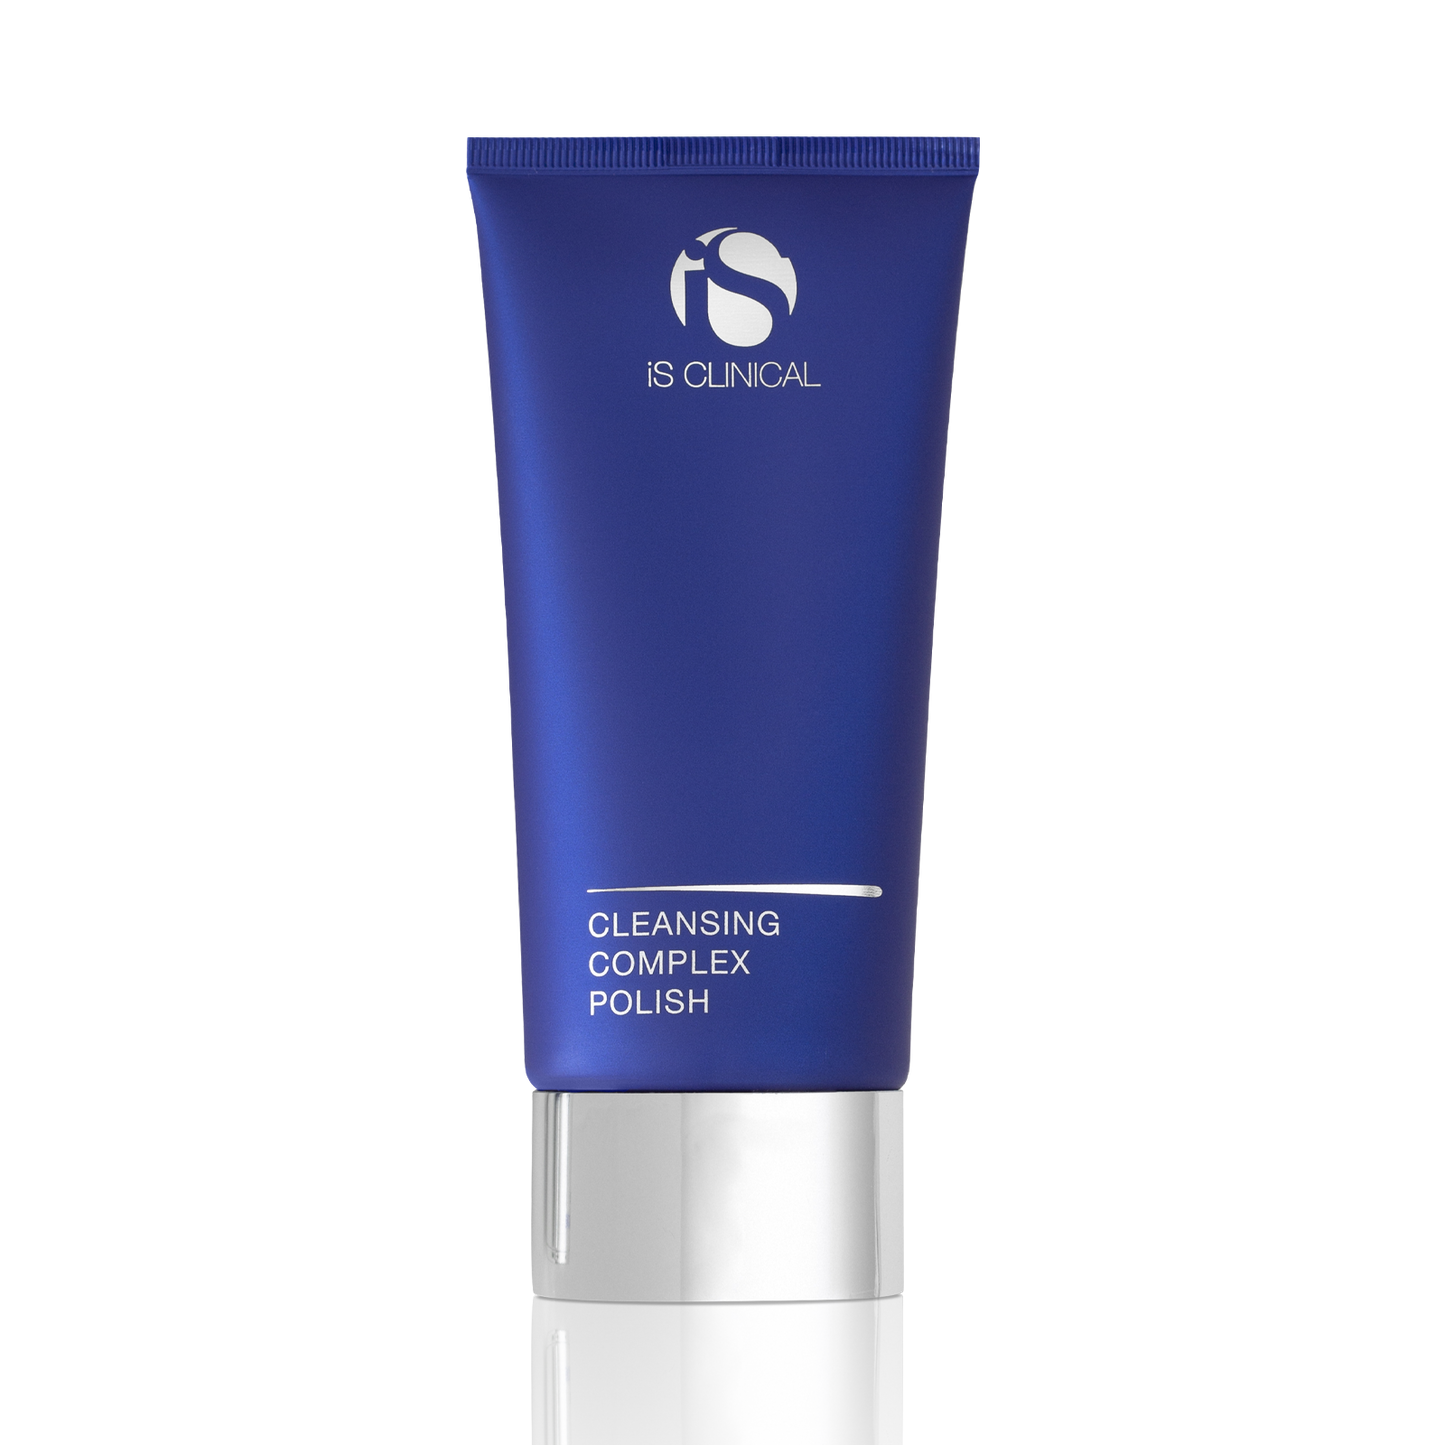 iS Clinical: Cleansing Complex Polish 120gr